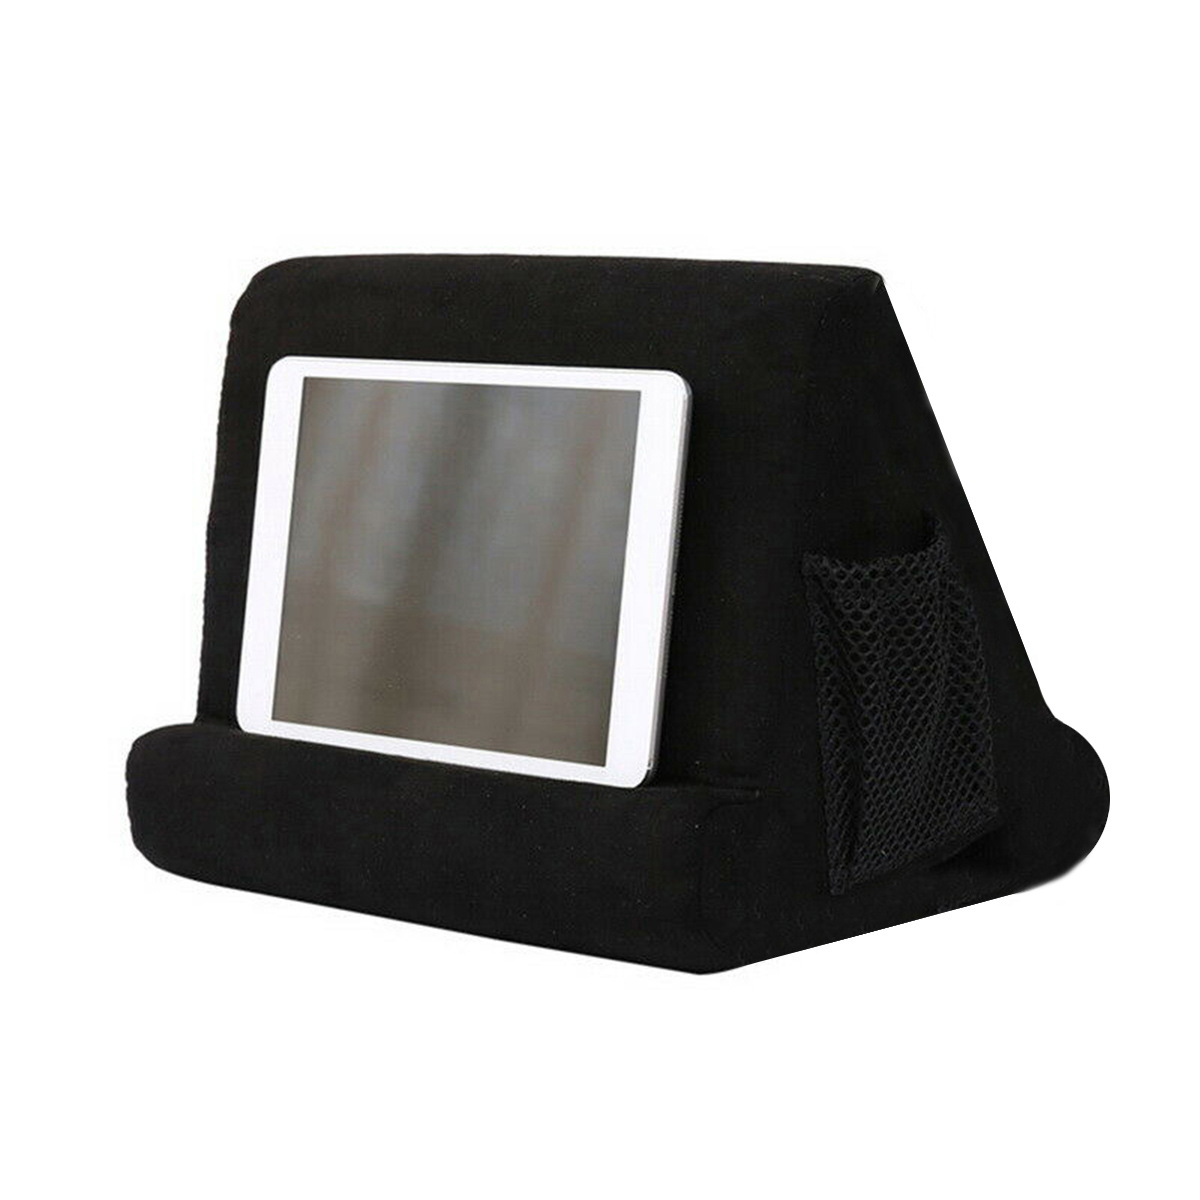 Portable Multi-Angle Soft Pillow Desktop Tablet Stand Mobile Phone Lazy Holder for iPad 